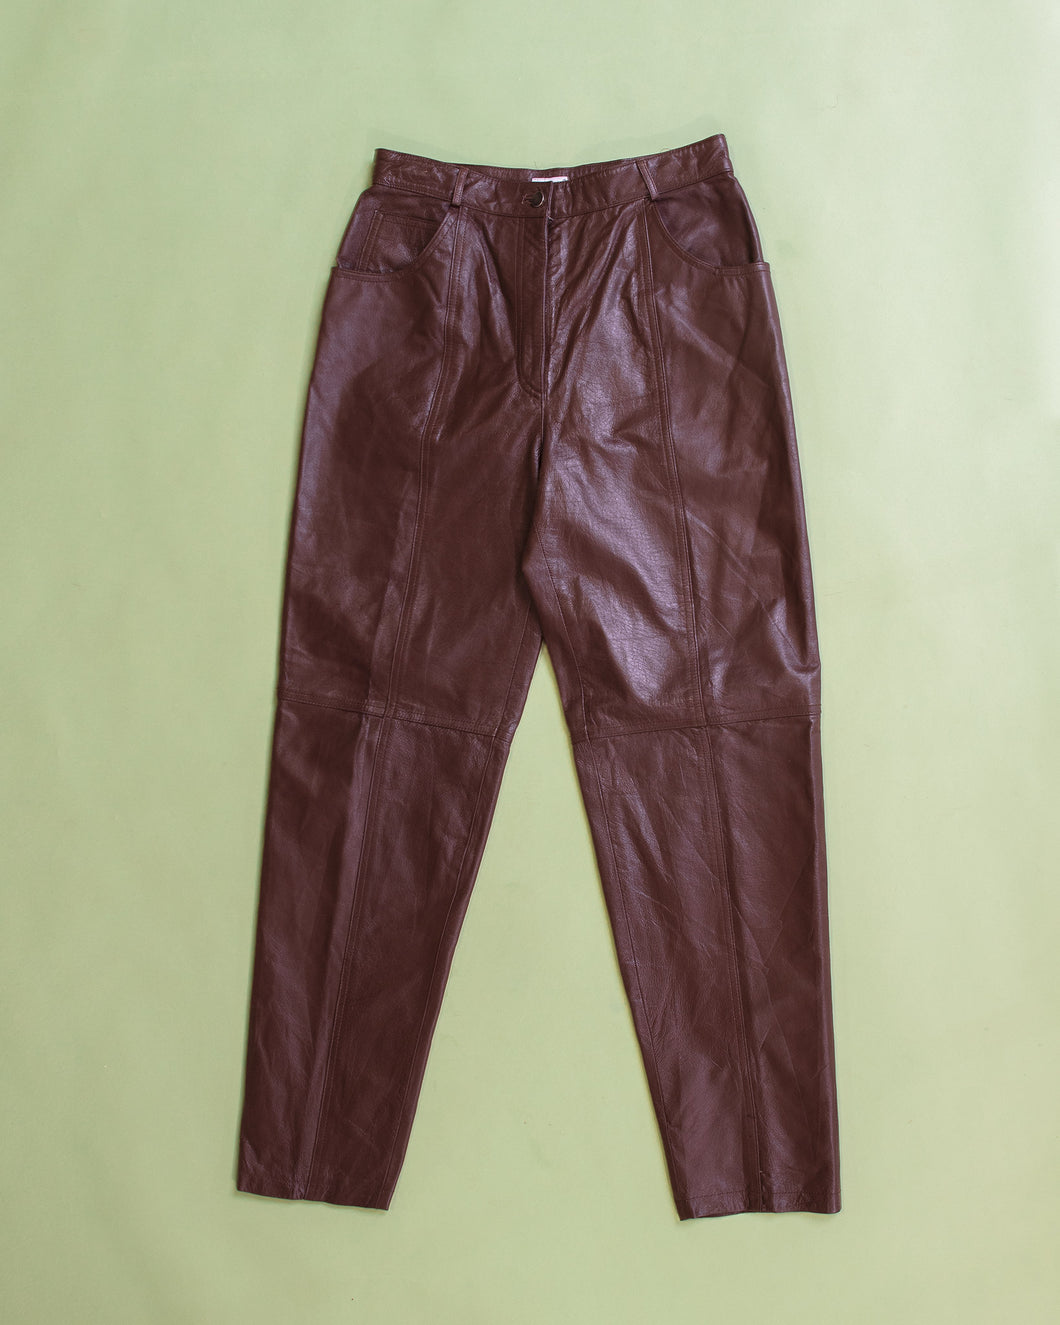 Chocolate Brown Panelled Brown Leather High Waisted Pants w 30